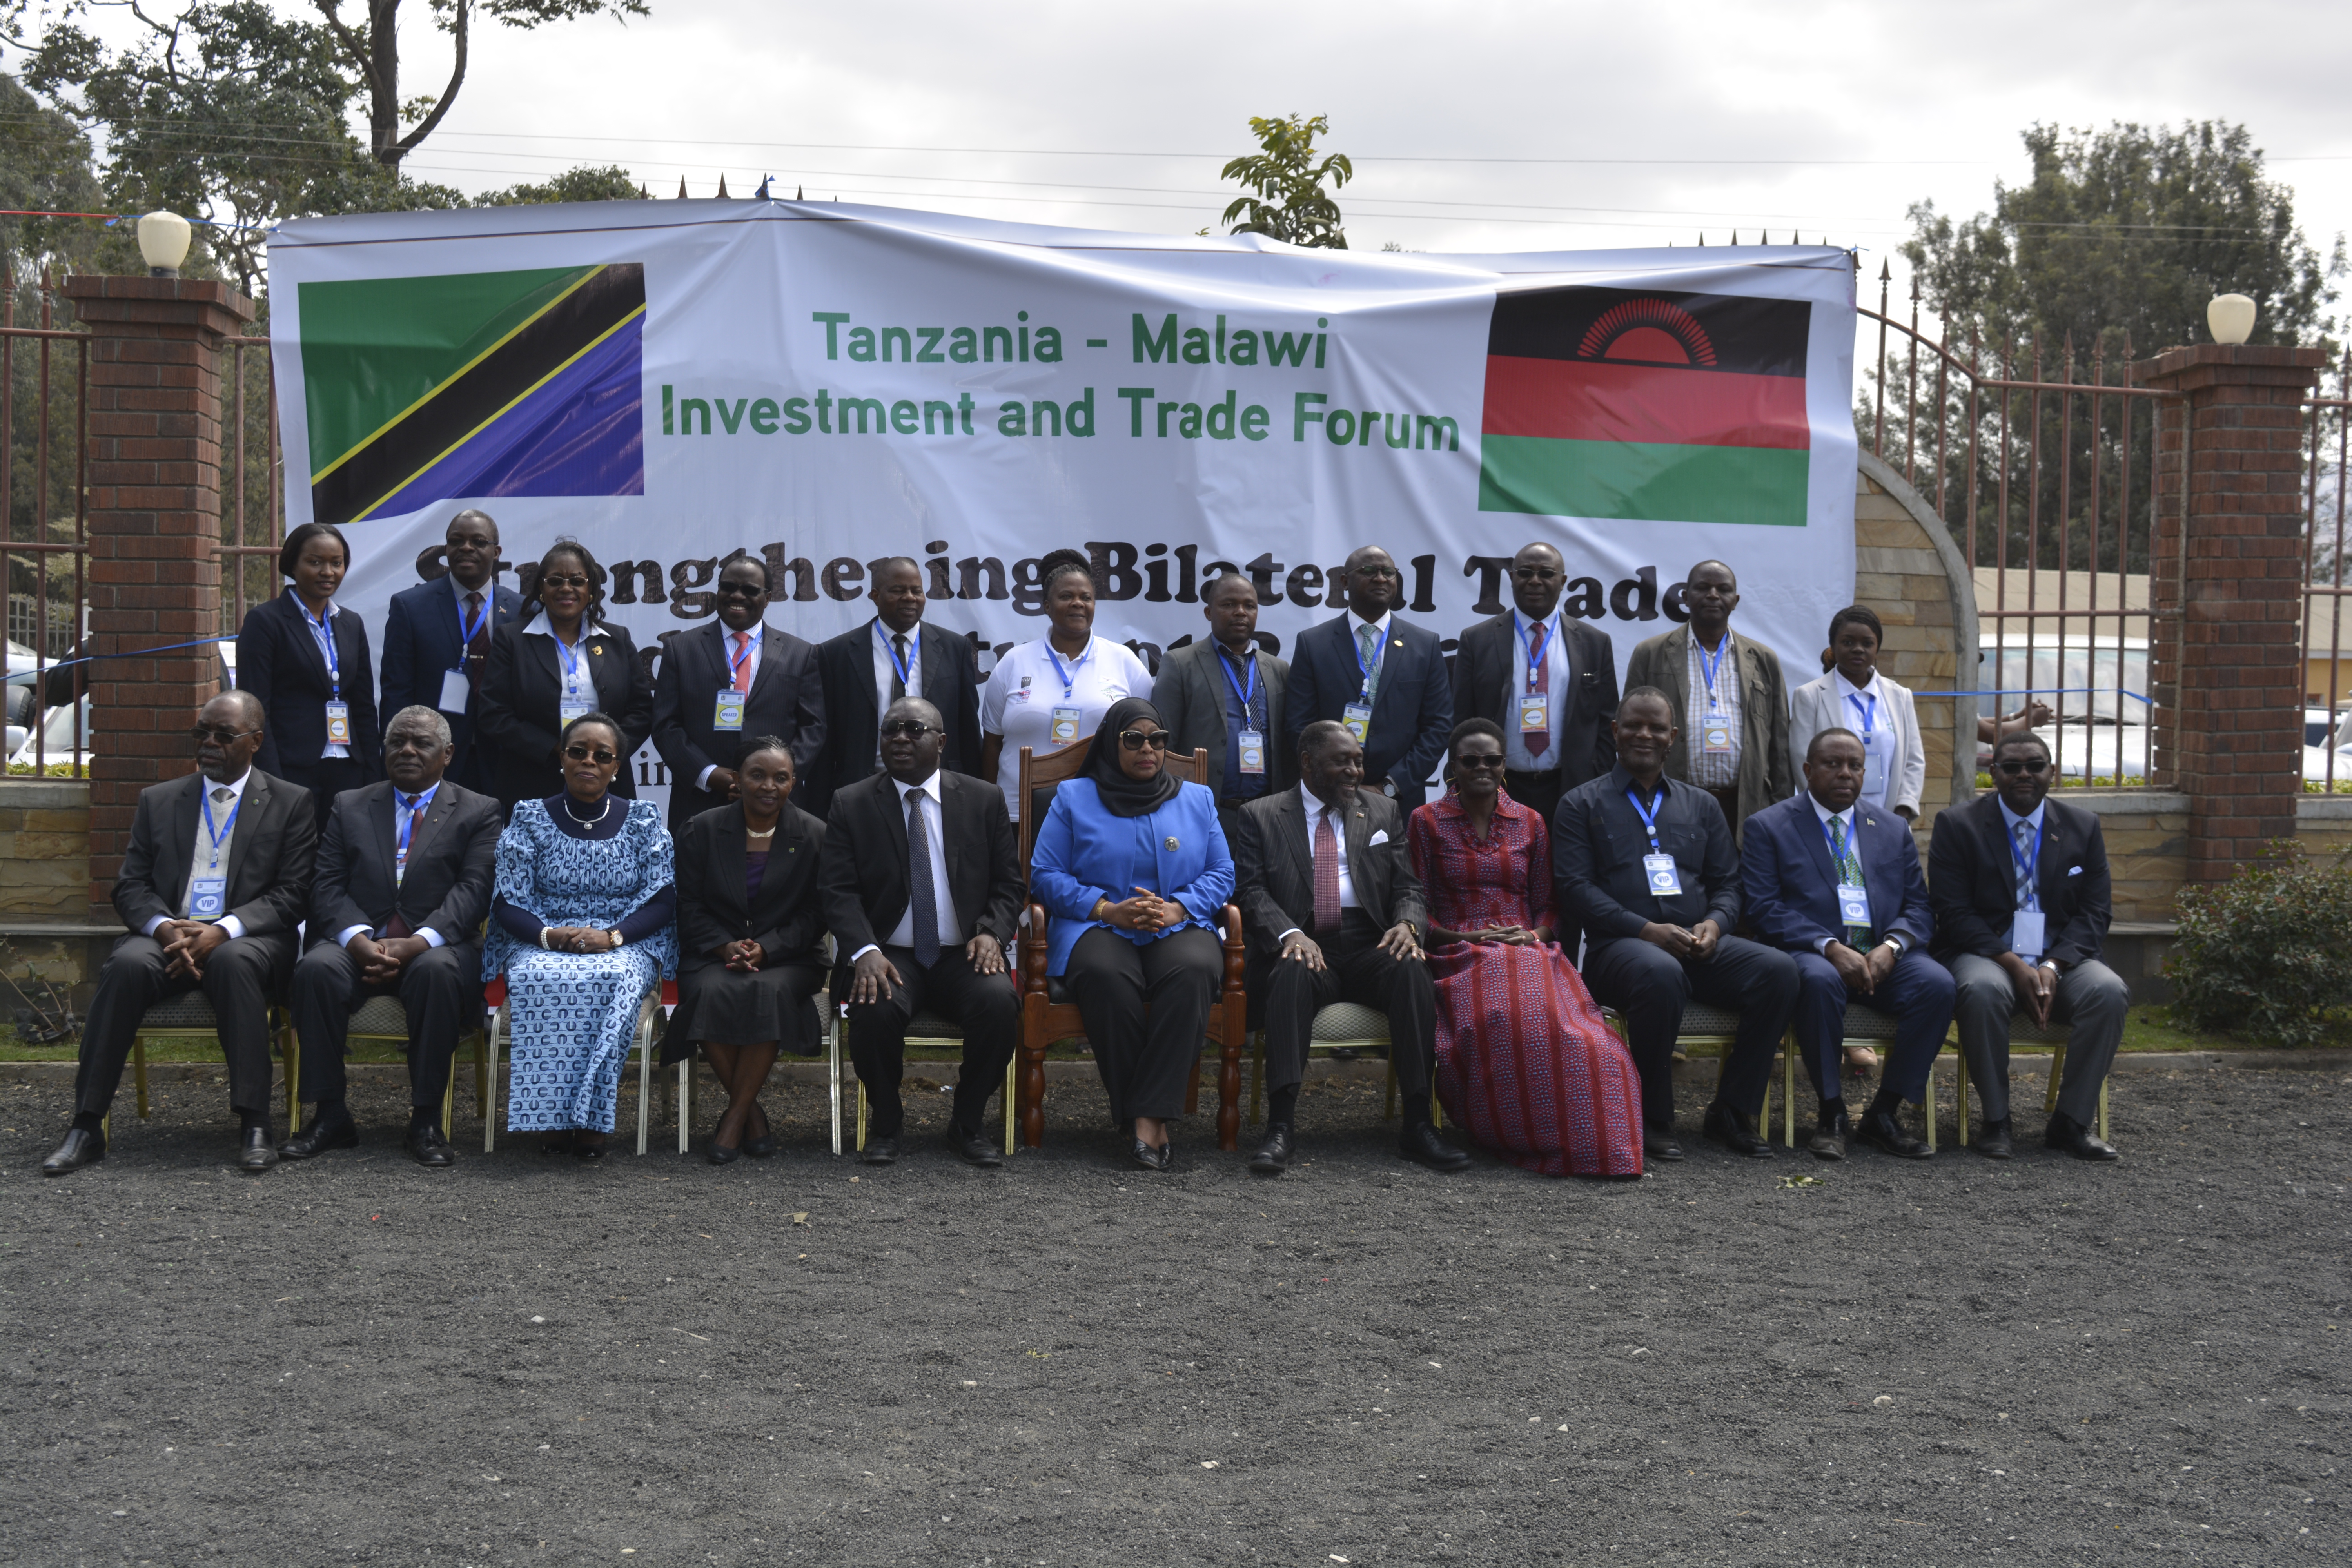 The Malawi Delegation pose to a Group Photograph with the Tanzanian Vice President